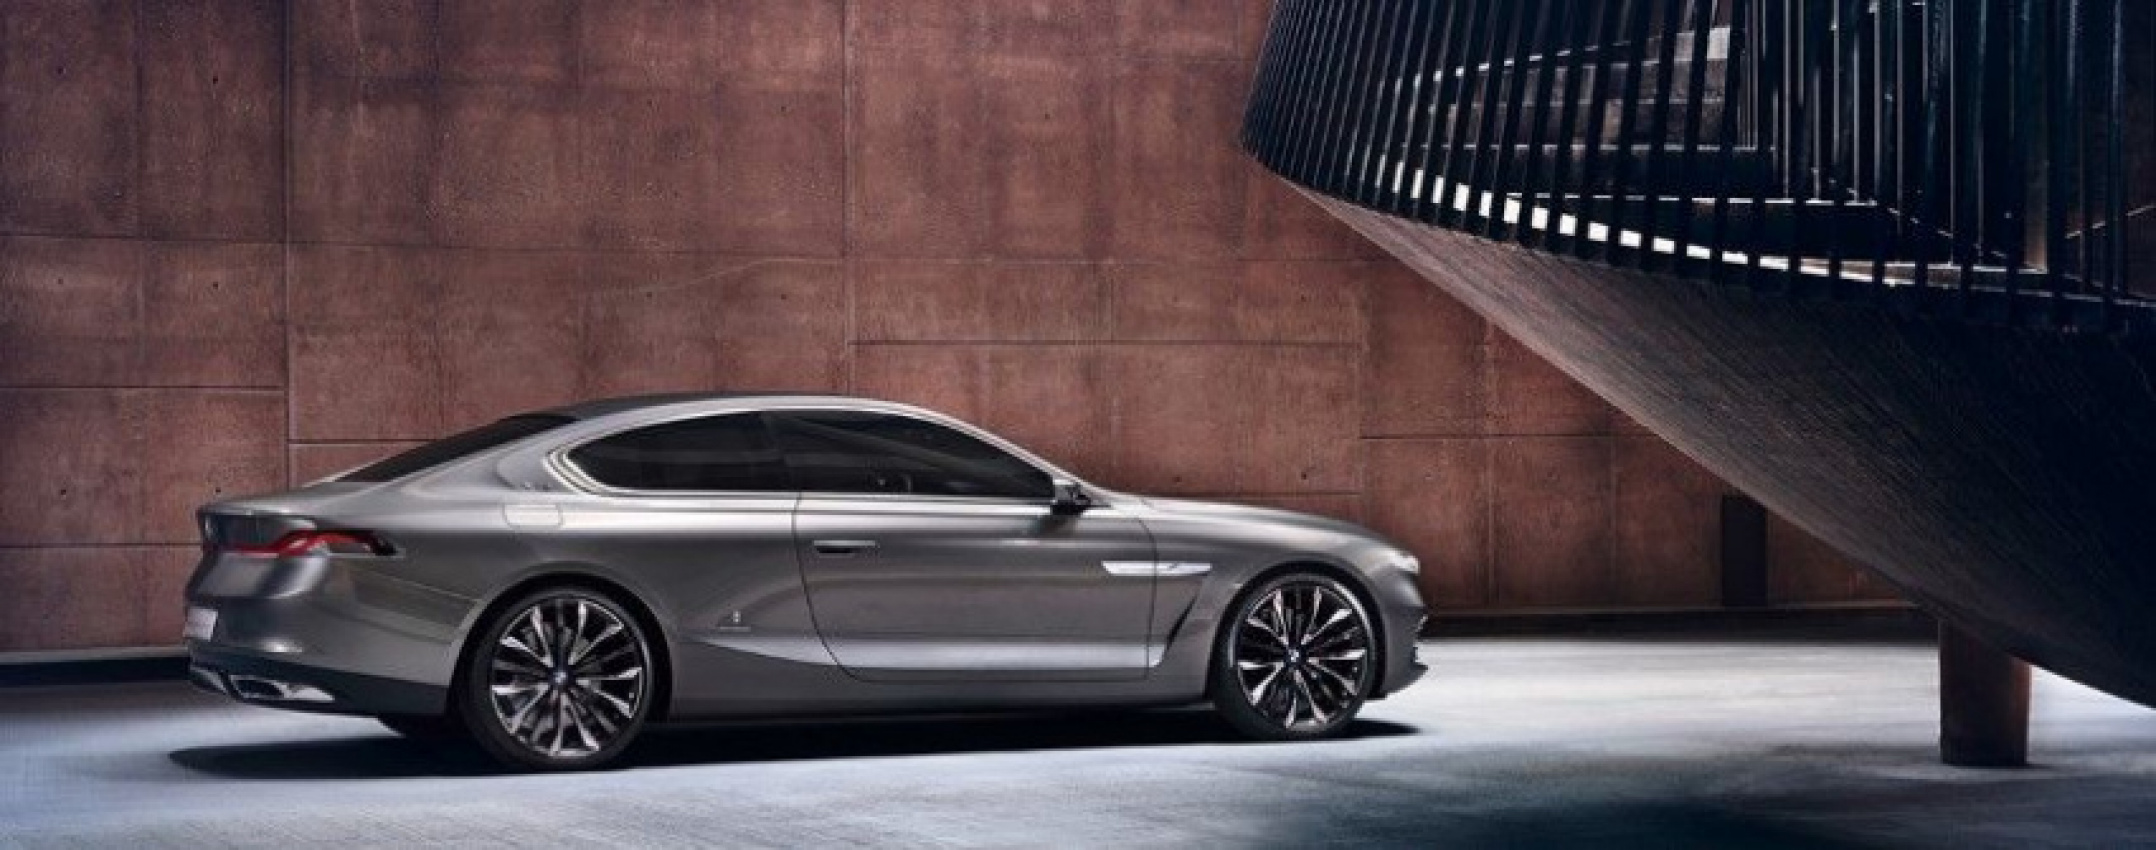 autos, bmw, cars, 8 series, auto news, bmw 8 series, m8, new bmw 8 series could debut in 2018. m8 in discussion.